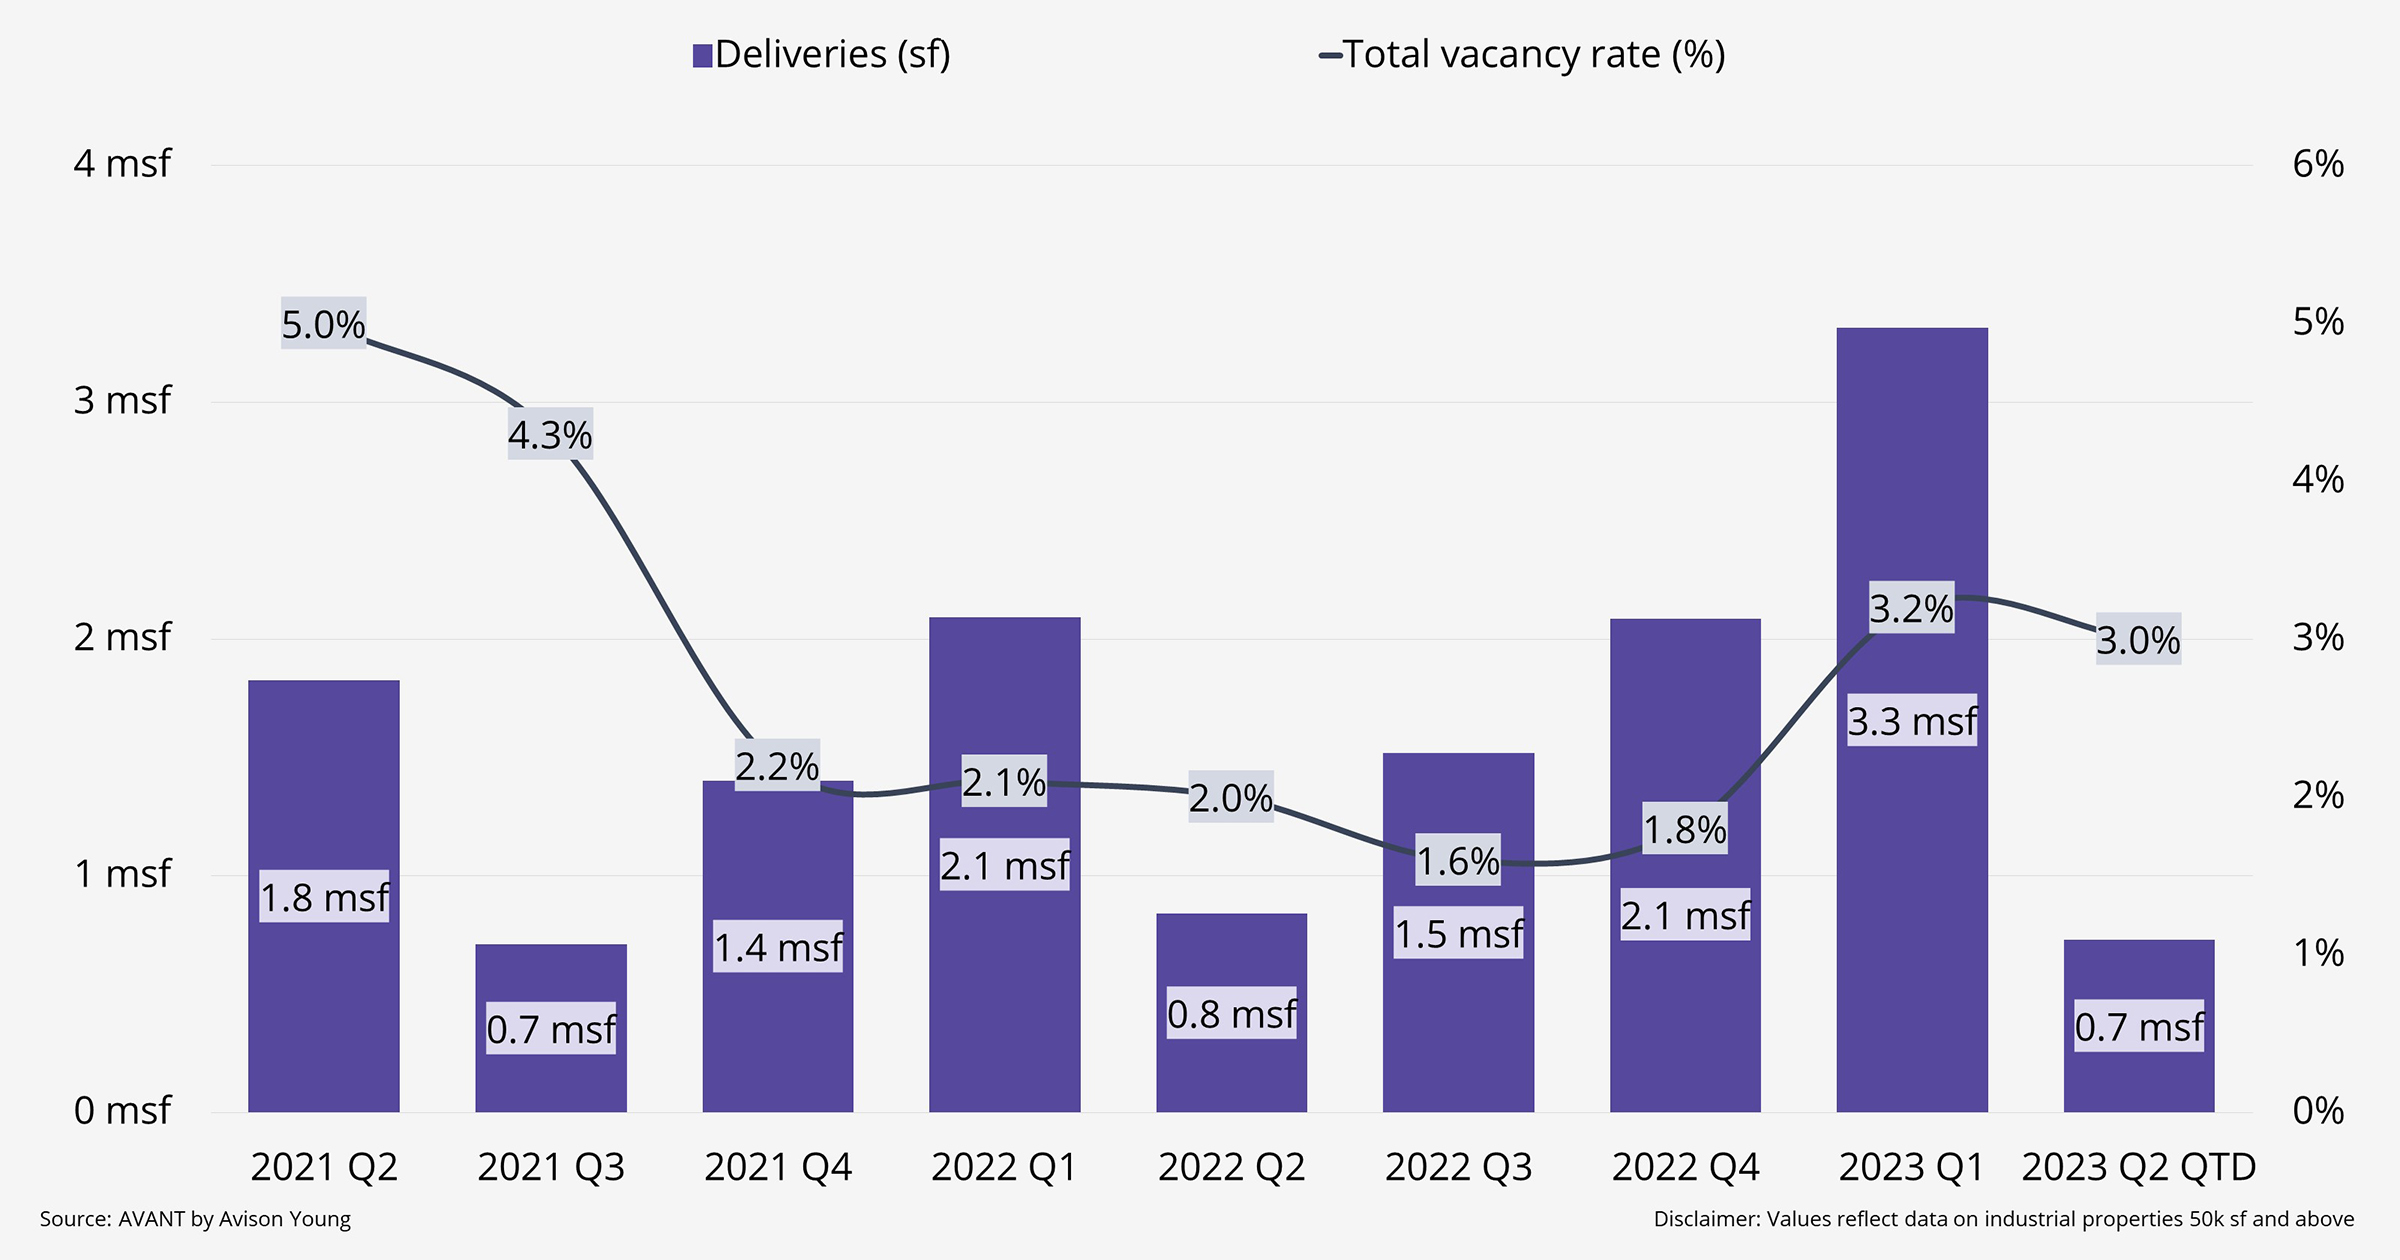 Bar chart displaying Las Vegas CRE deliveries and total vacancies from 2021 to 2023